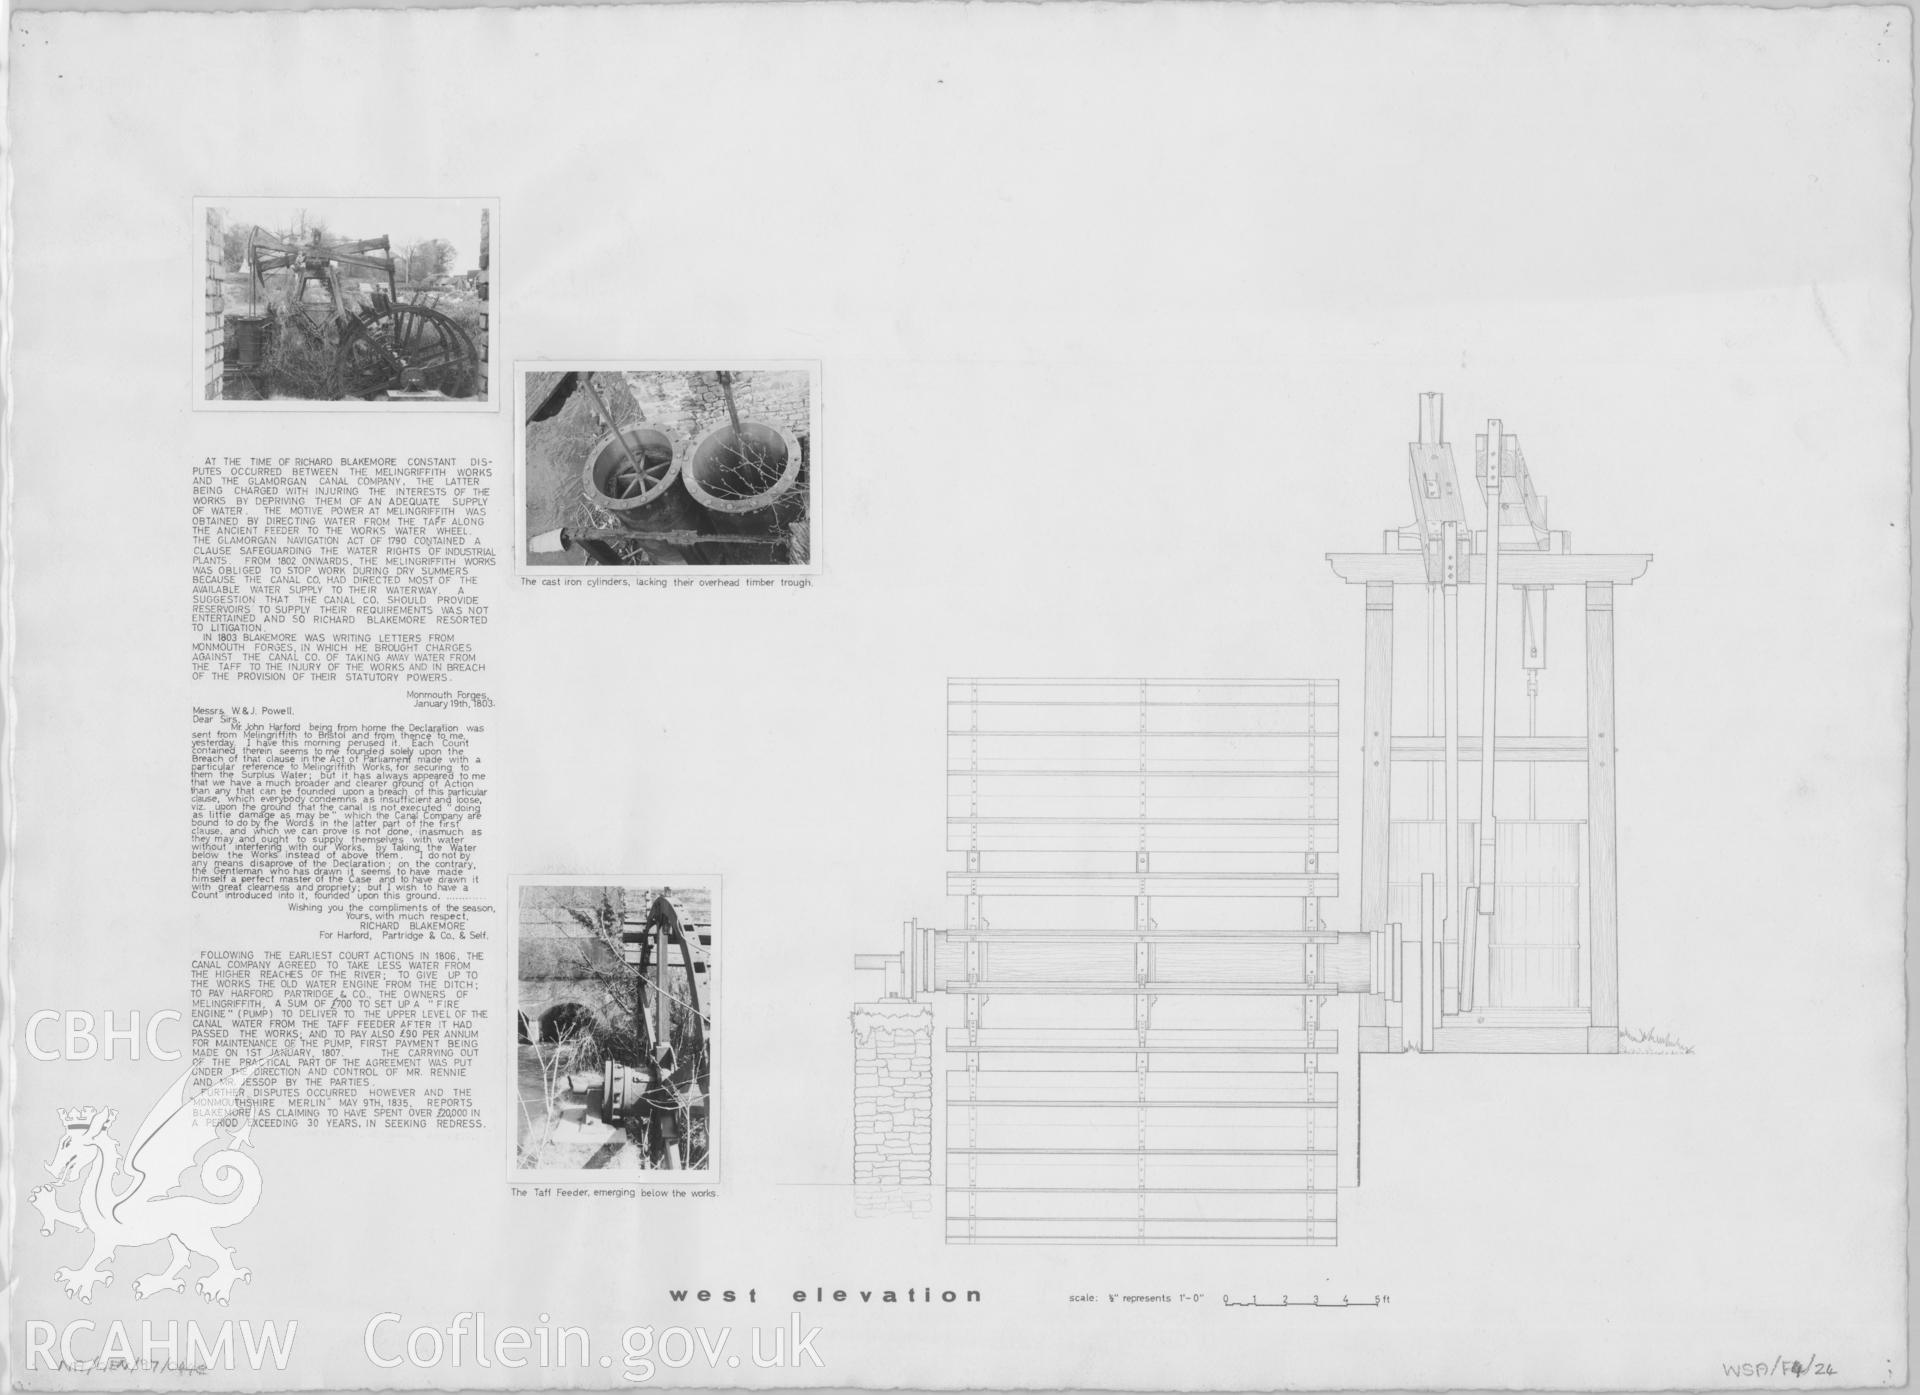 Measured drawing showing west elevation and three B&W photos of Melingriffith Water Pump, produced by R.V. Bayliss and I. Payne, undated.